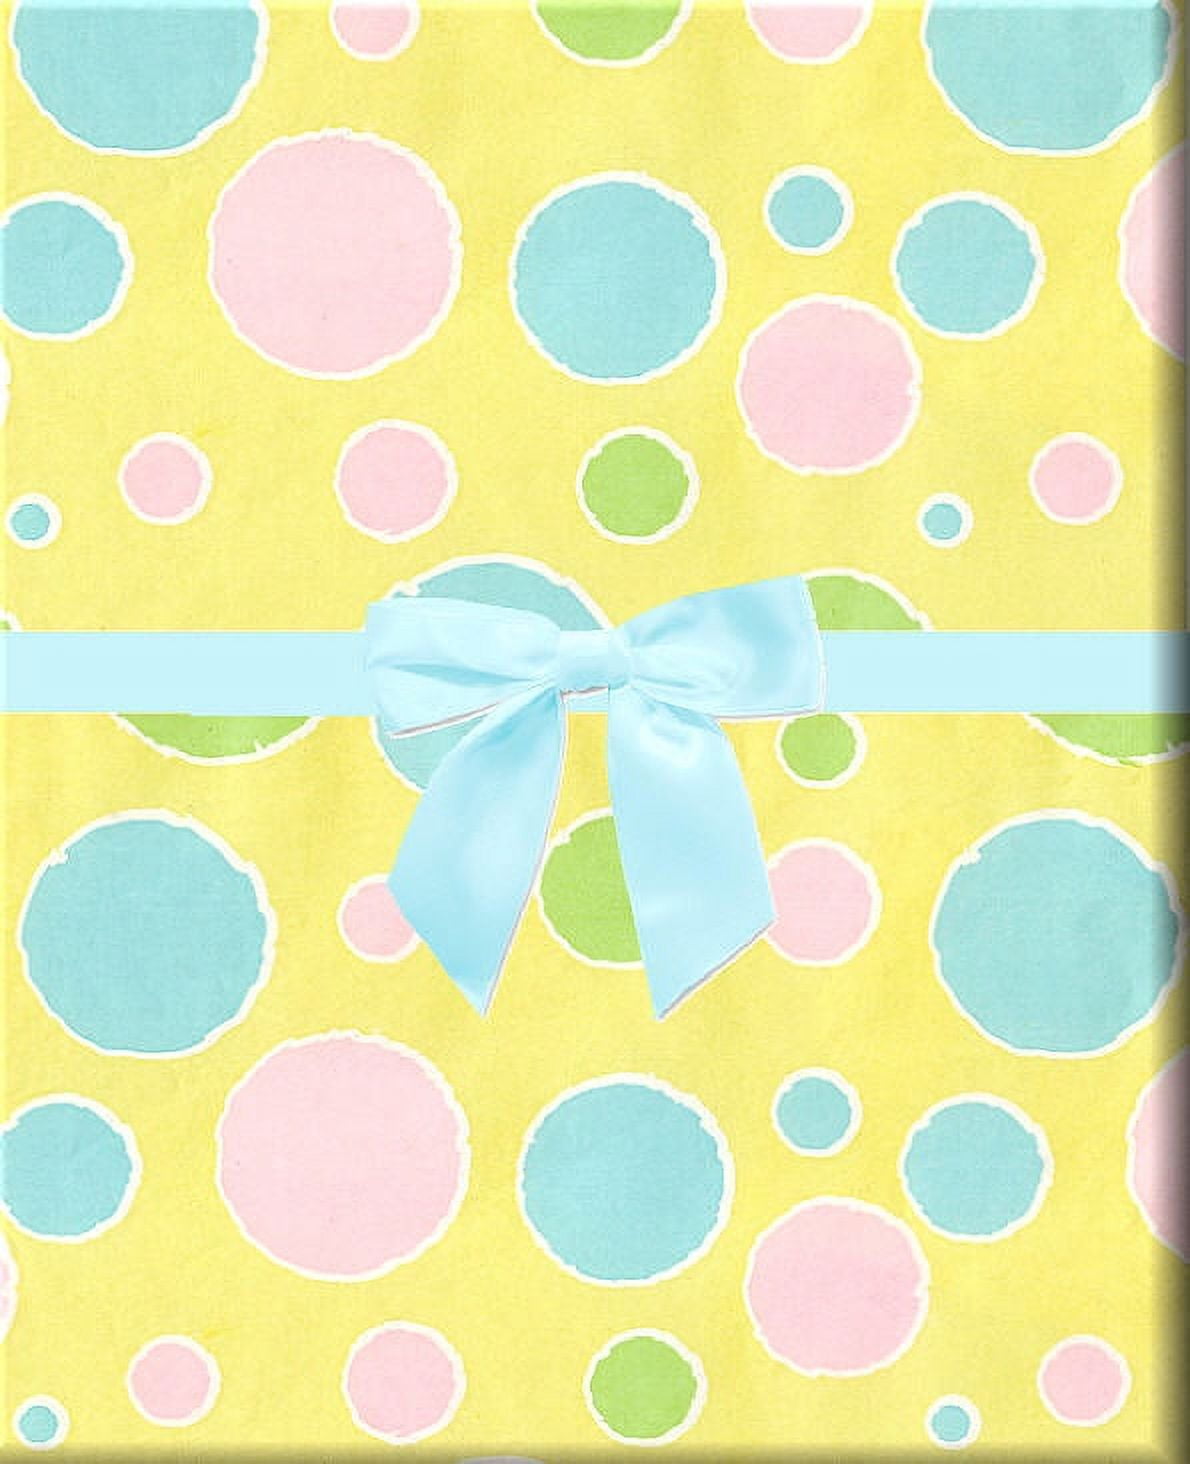 Fun Question Mark Gift Wrap Thick Wrapping Paper Boy or Girl Theme Gender  Reveal Baby Shower Party Decor (One 20 inch x 30 inch sheet)